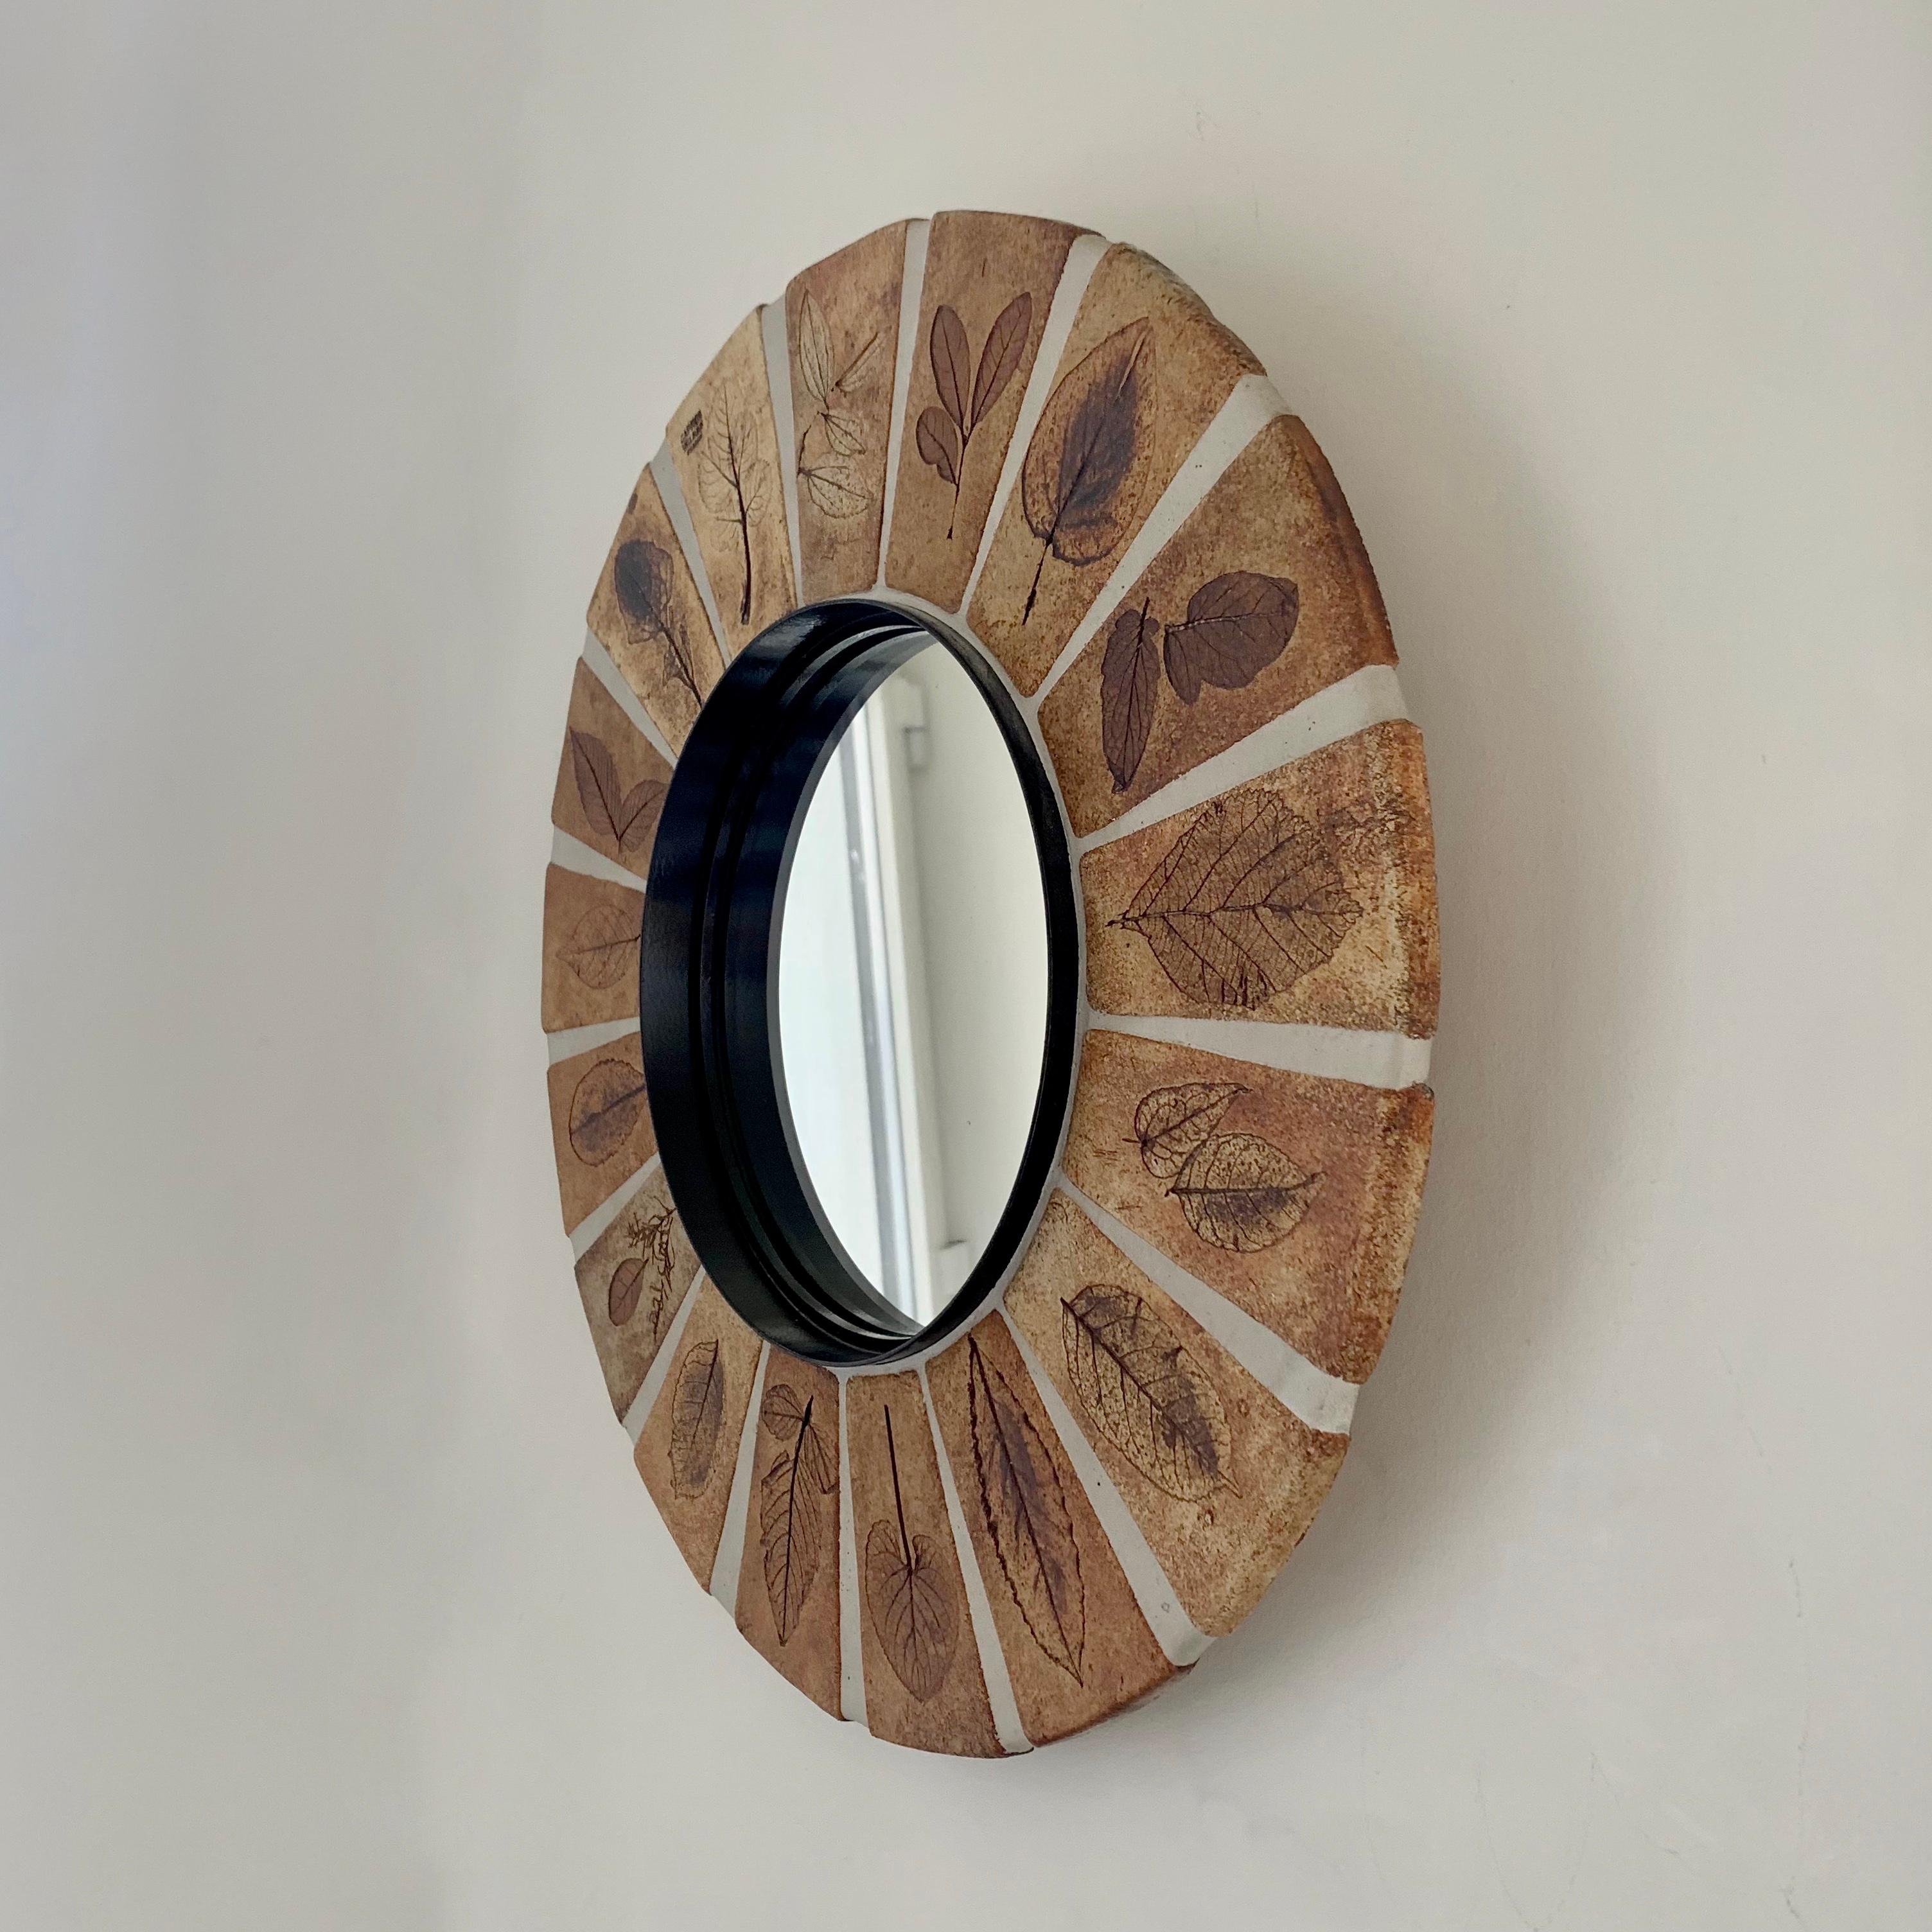 French Roger Capron Signed Ceramic Round Mirror, circa 1970, Vallauris, France.